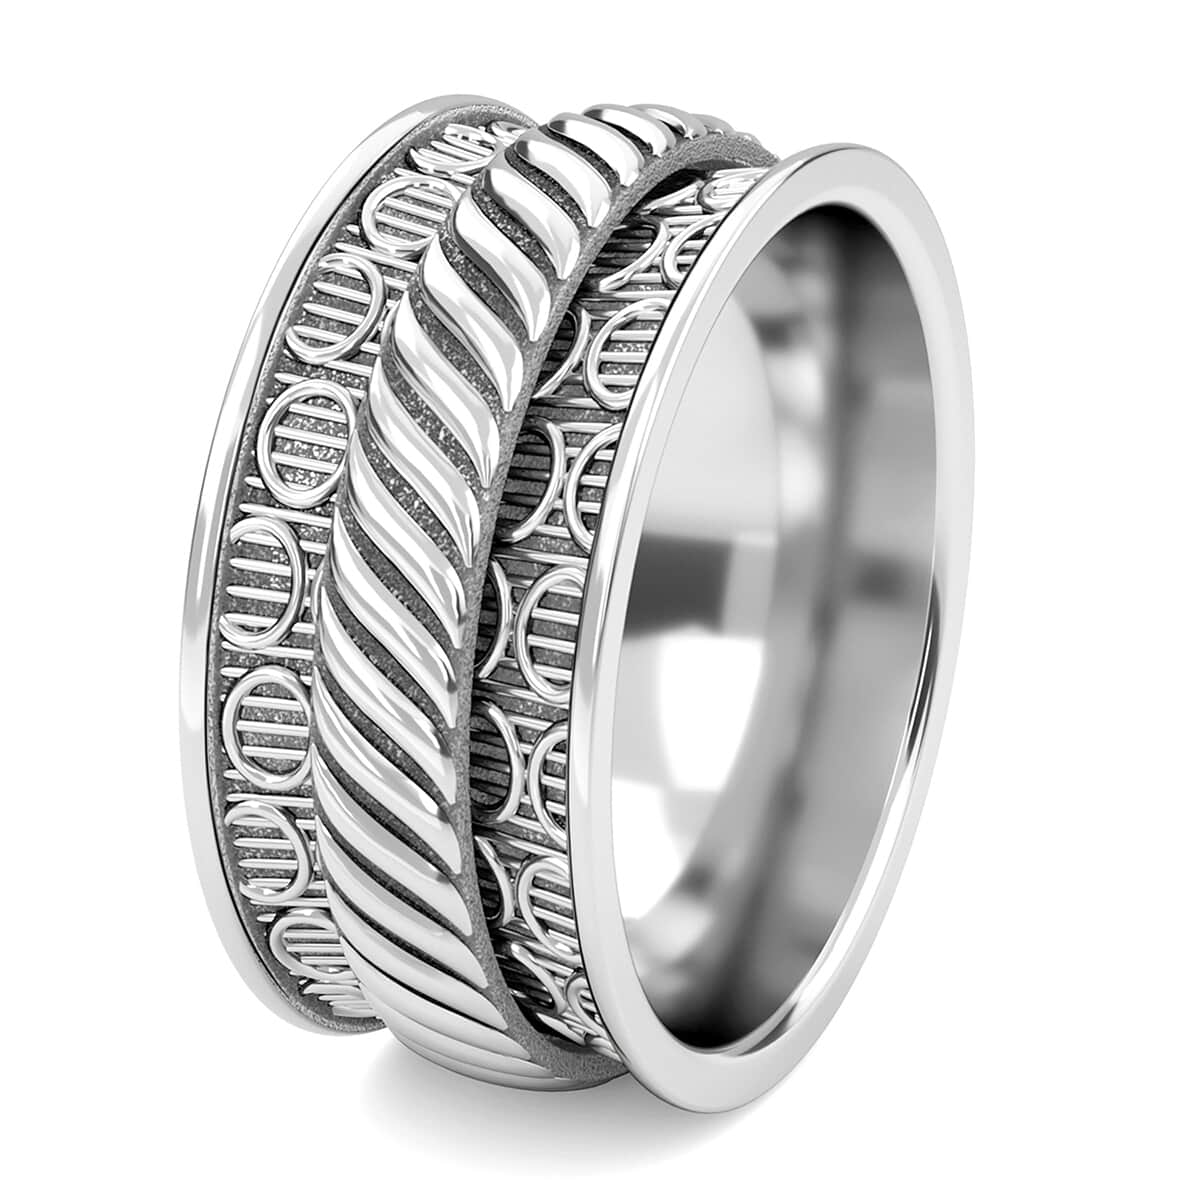 Sterling Silver Spinner Ring, Anxiety Ring for Women, Fidget Rings for Anxiety for Women, Stress Relieving Anxiety Ring (Size 6.0) (4.75 g) image number 5